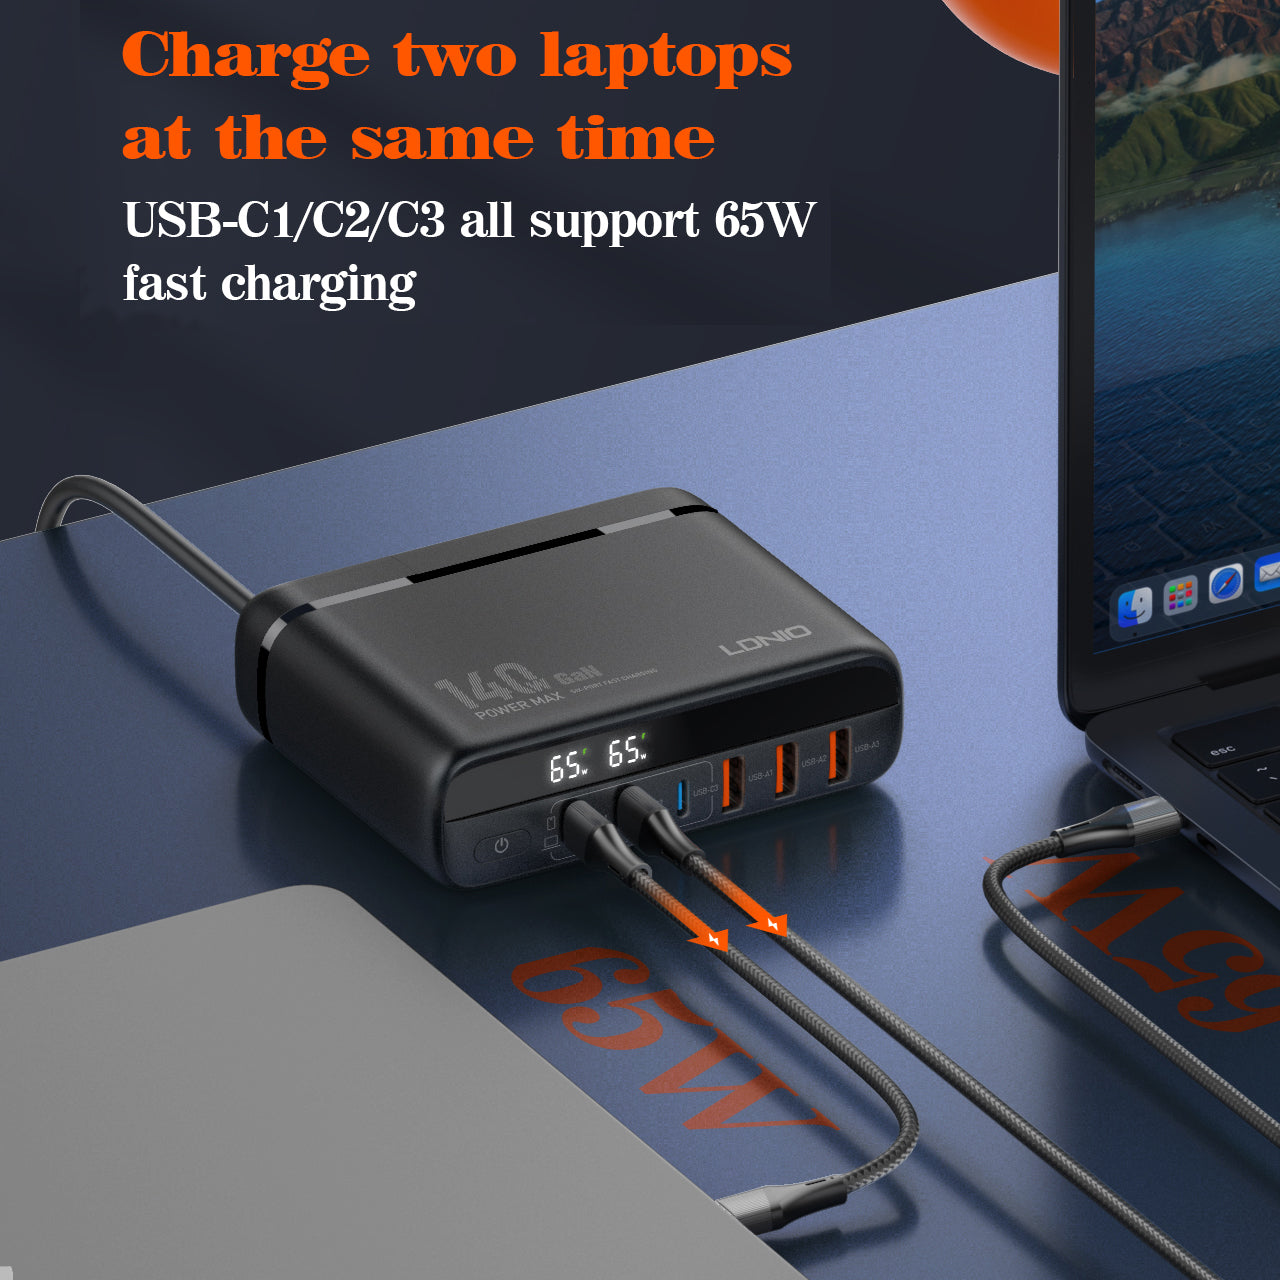 LDNIO A6140C GaN 140W Travel Wall Charger Adpater PD QC3.0 Super Fast Charging USB Type C 6 Port For Laptop Phone Tablet